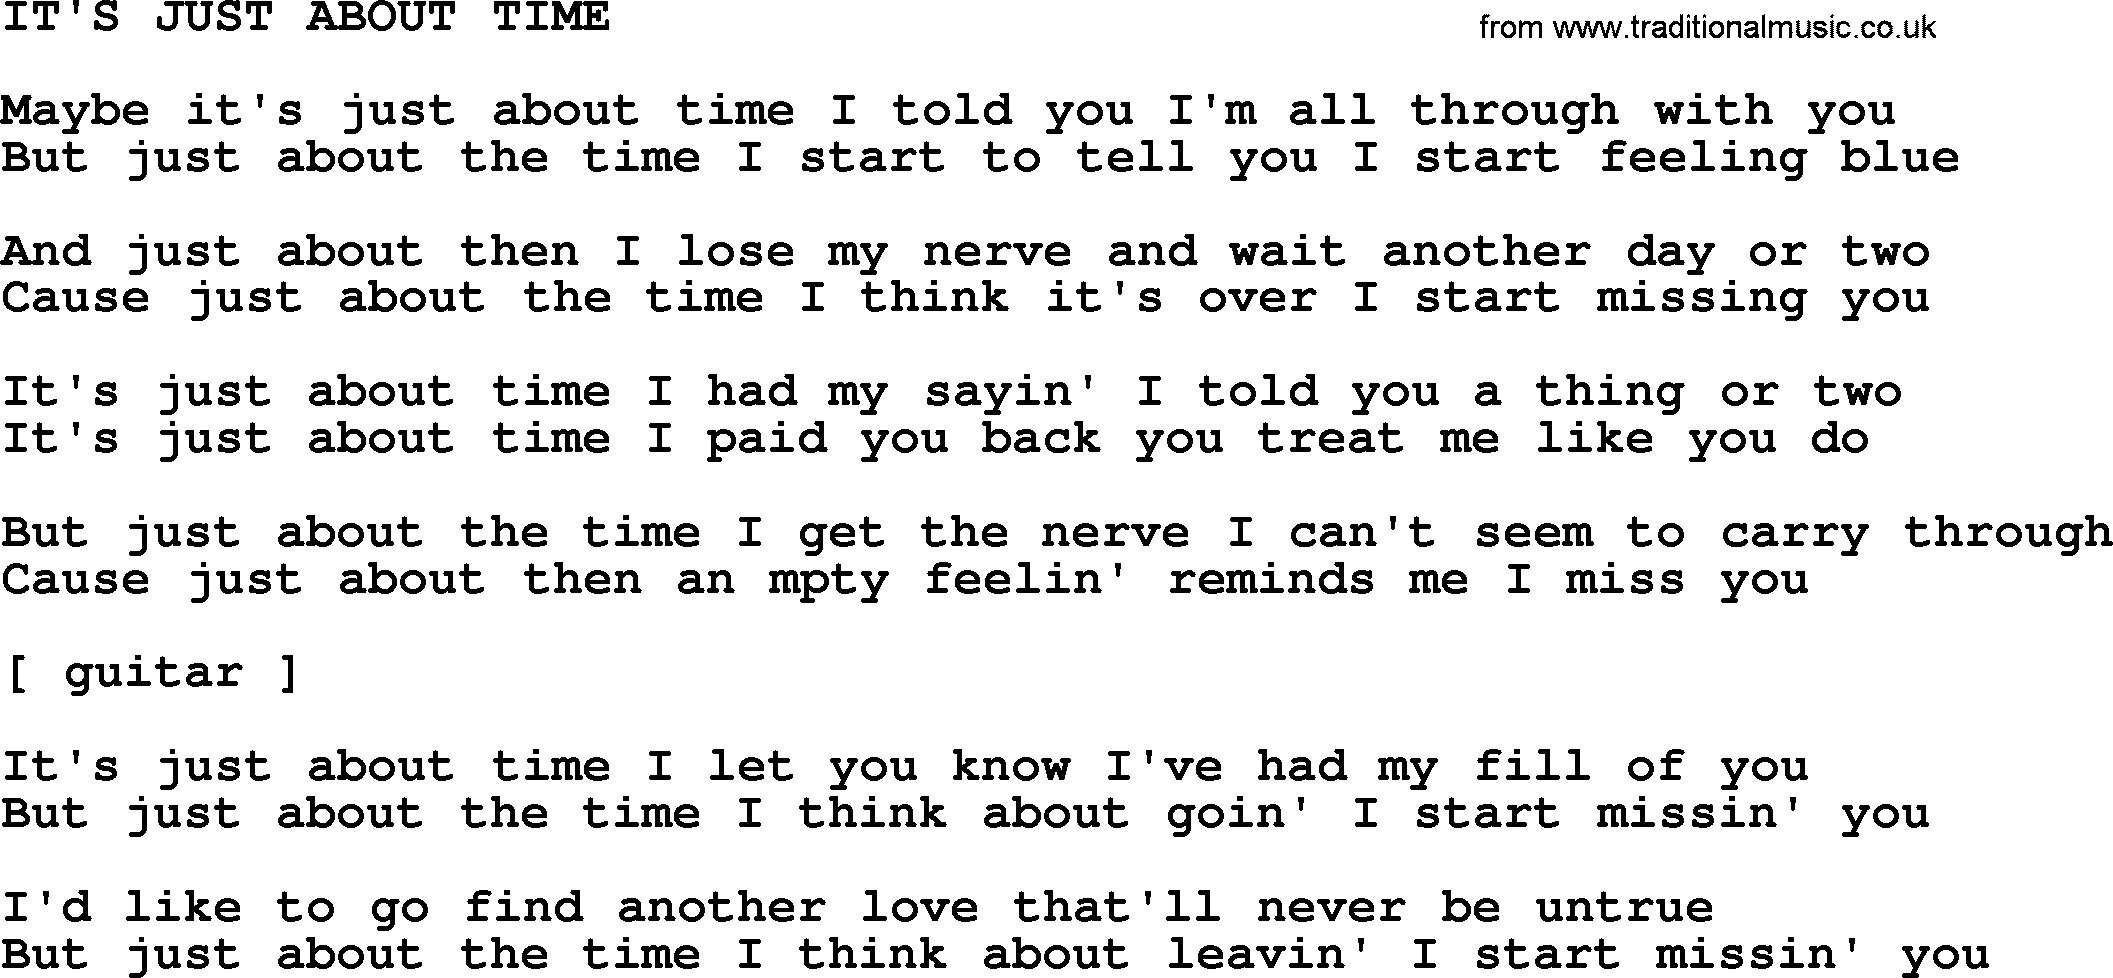 Johnny Cash song It's Just About Time.txt lyrics